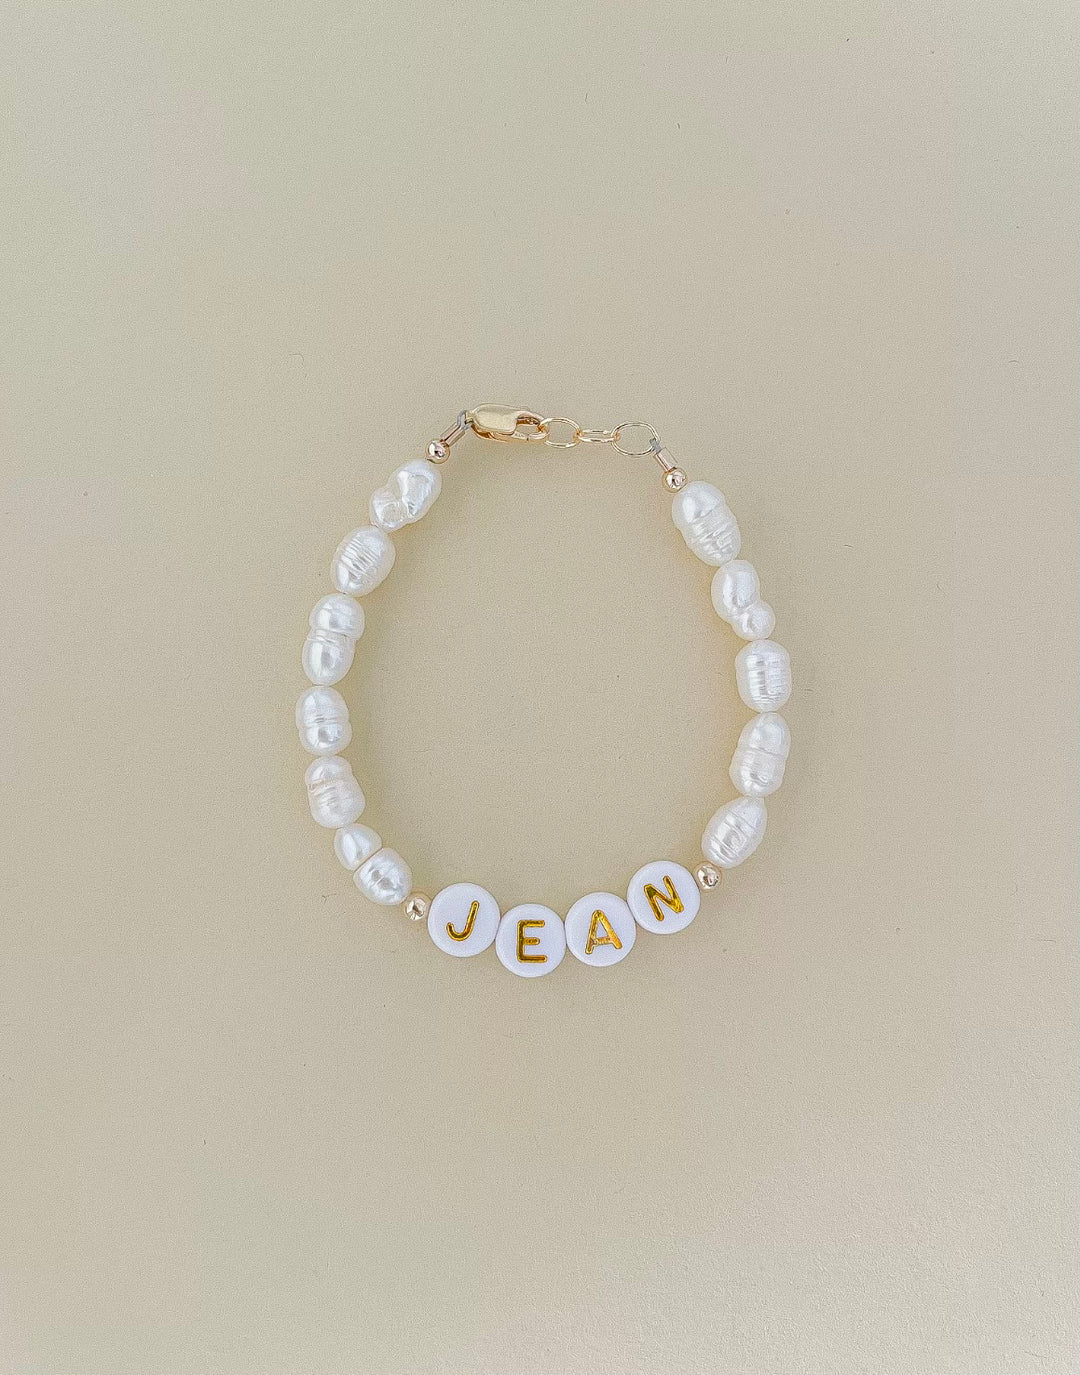 Personalized Name Mommy & Baby Bracelet in Pearly White